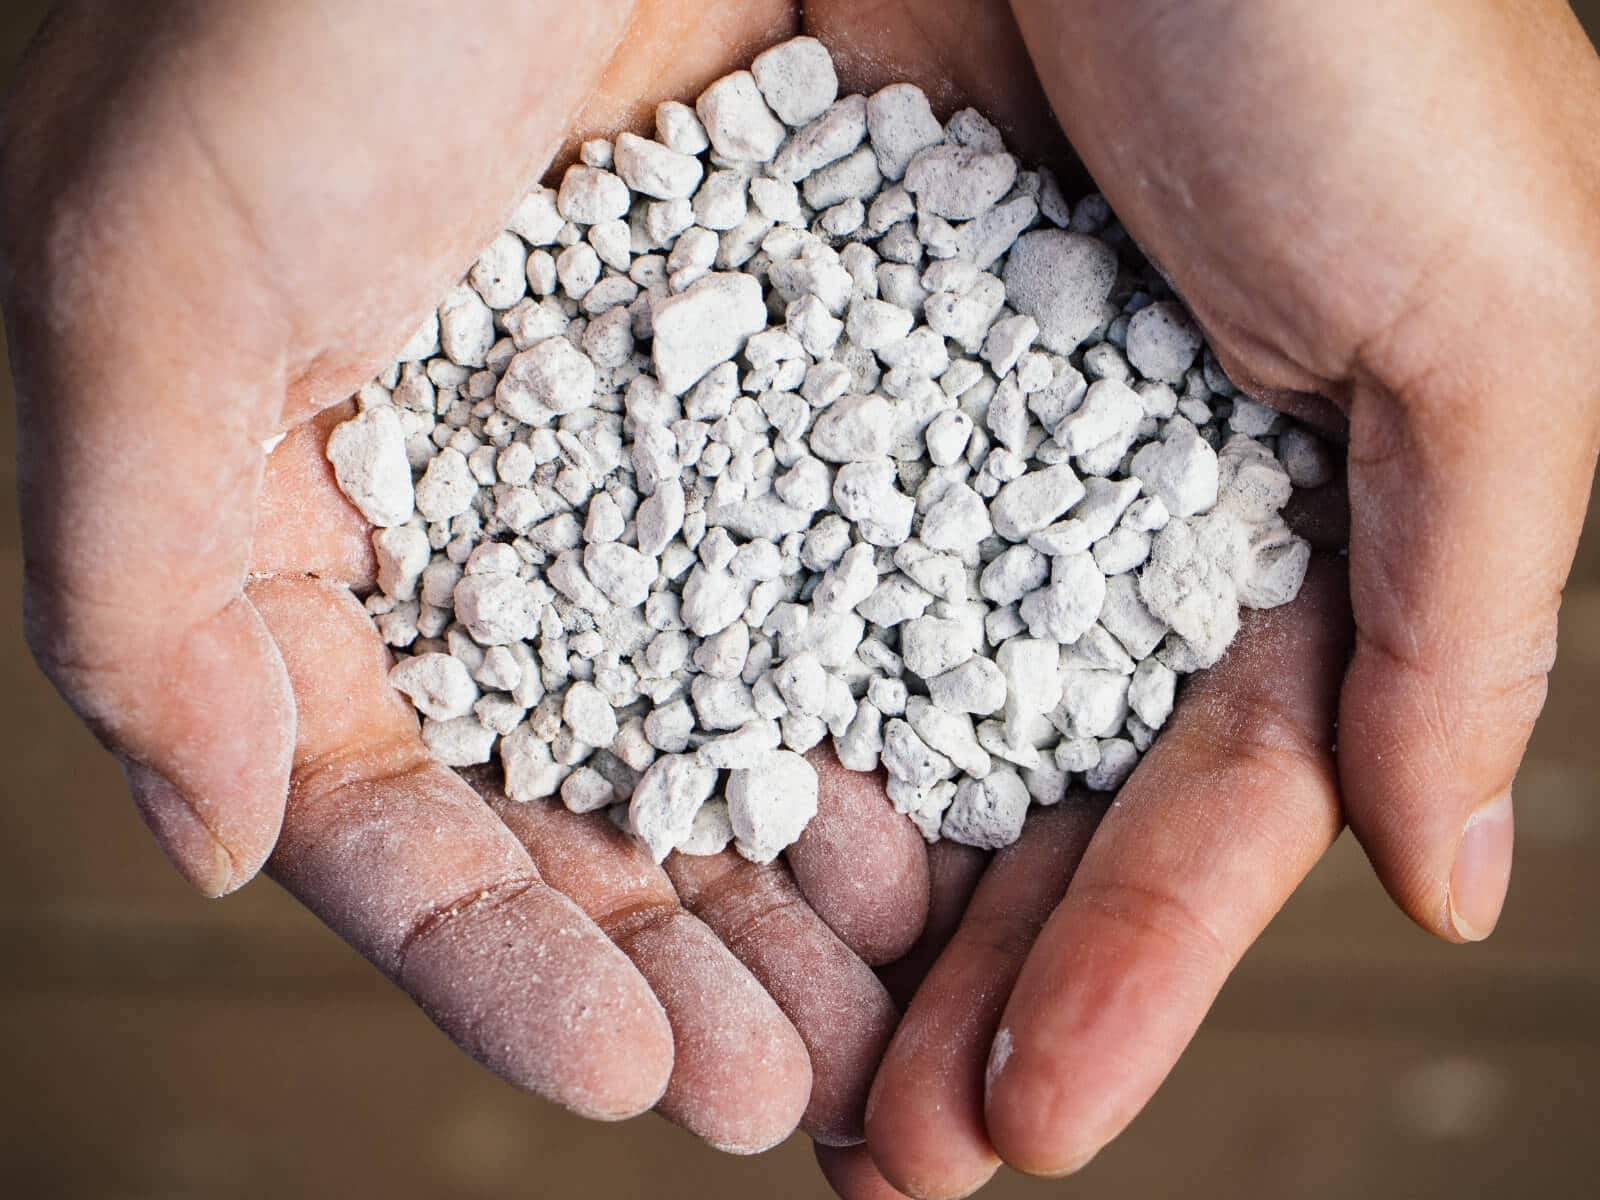 Perlite is a mined volcanic rock product